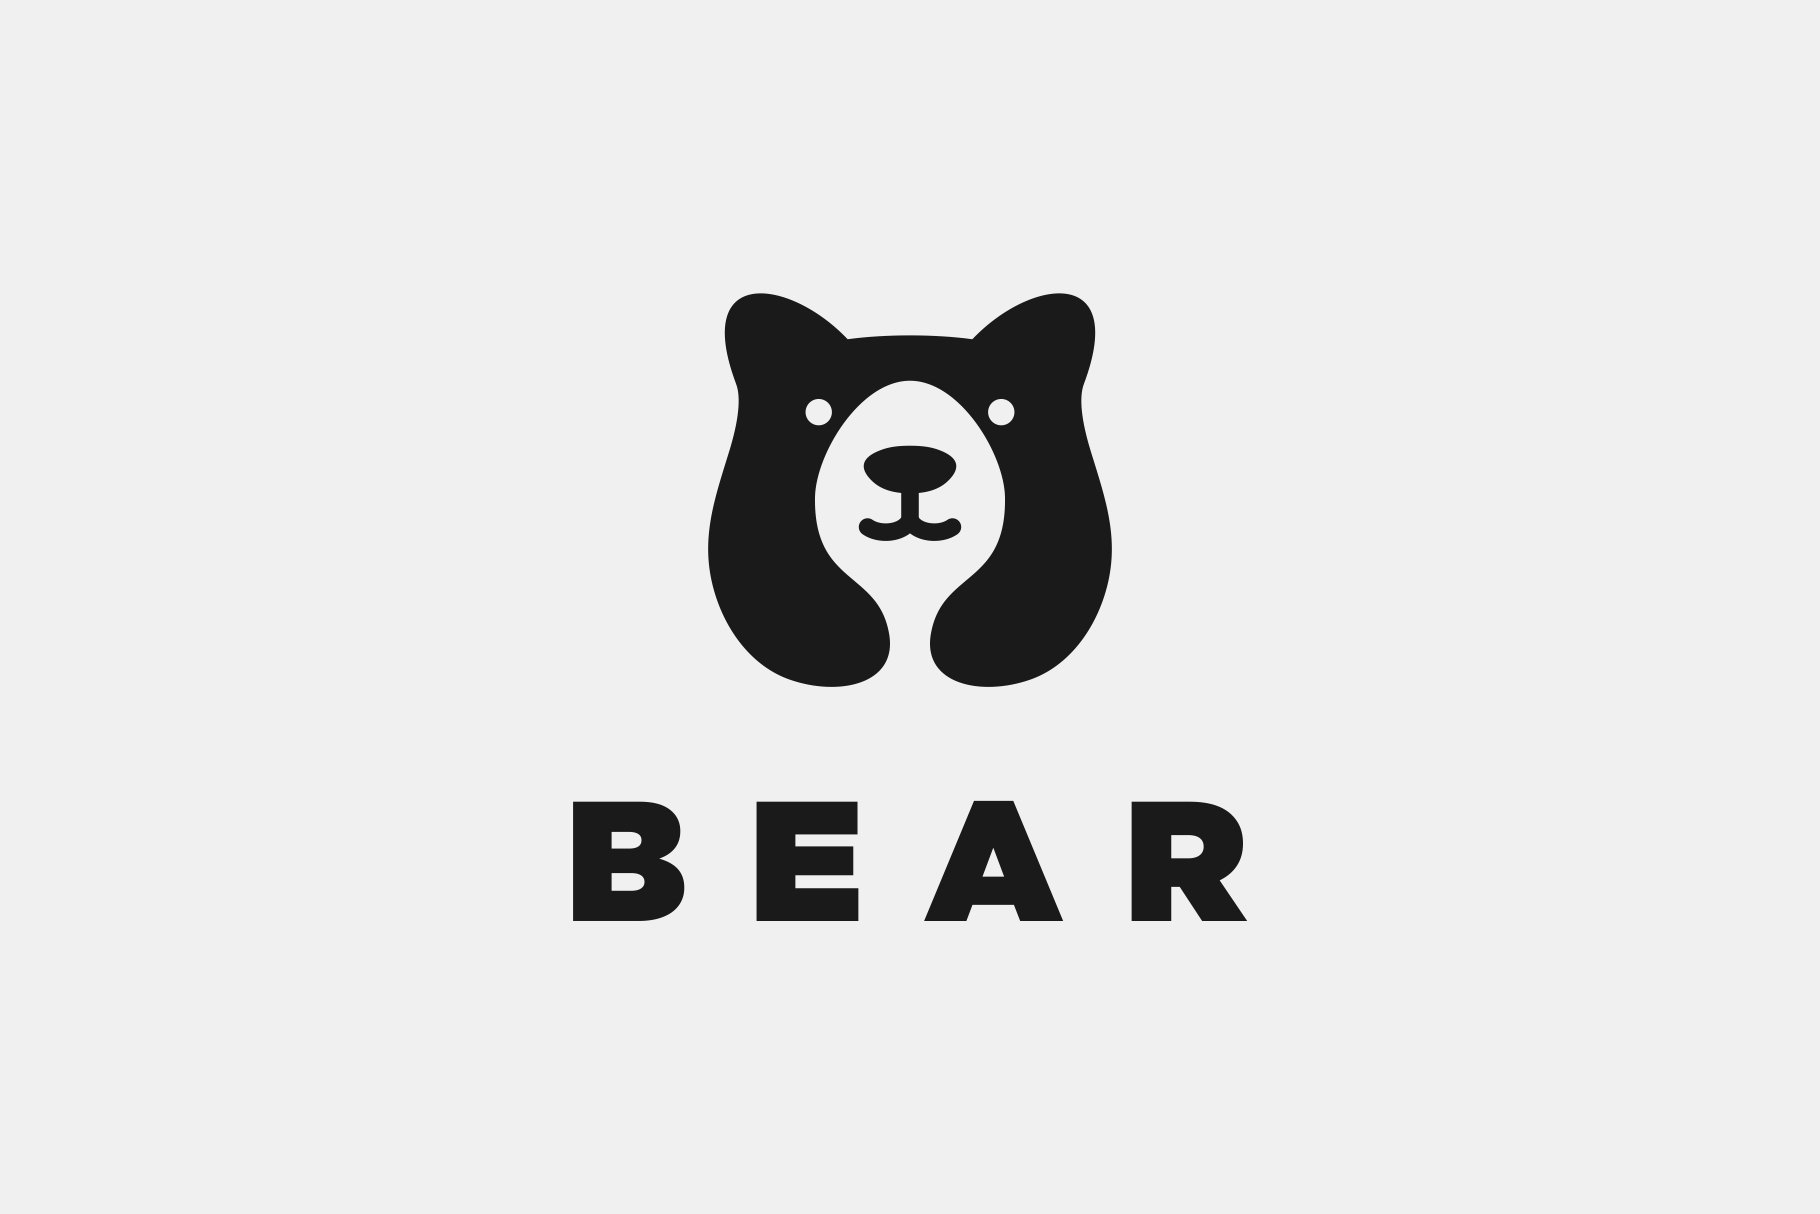 Bear Simple Negative Space Logo cover image.